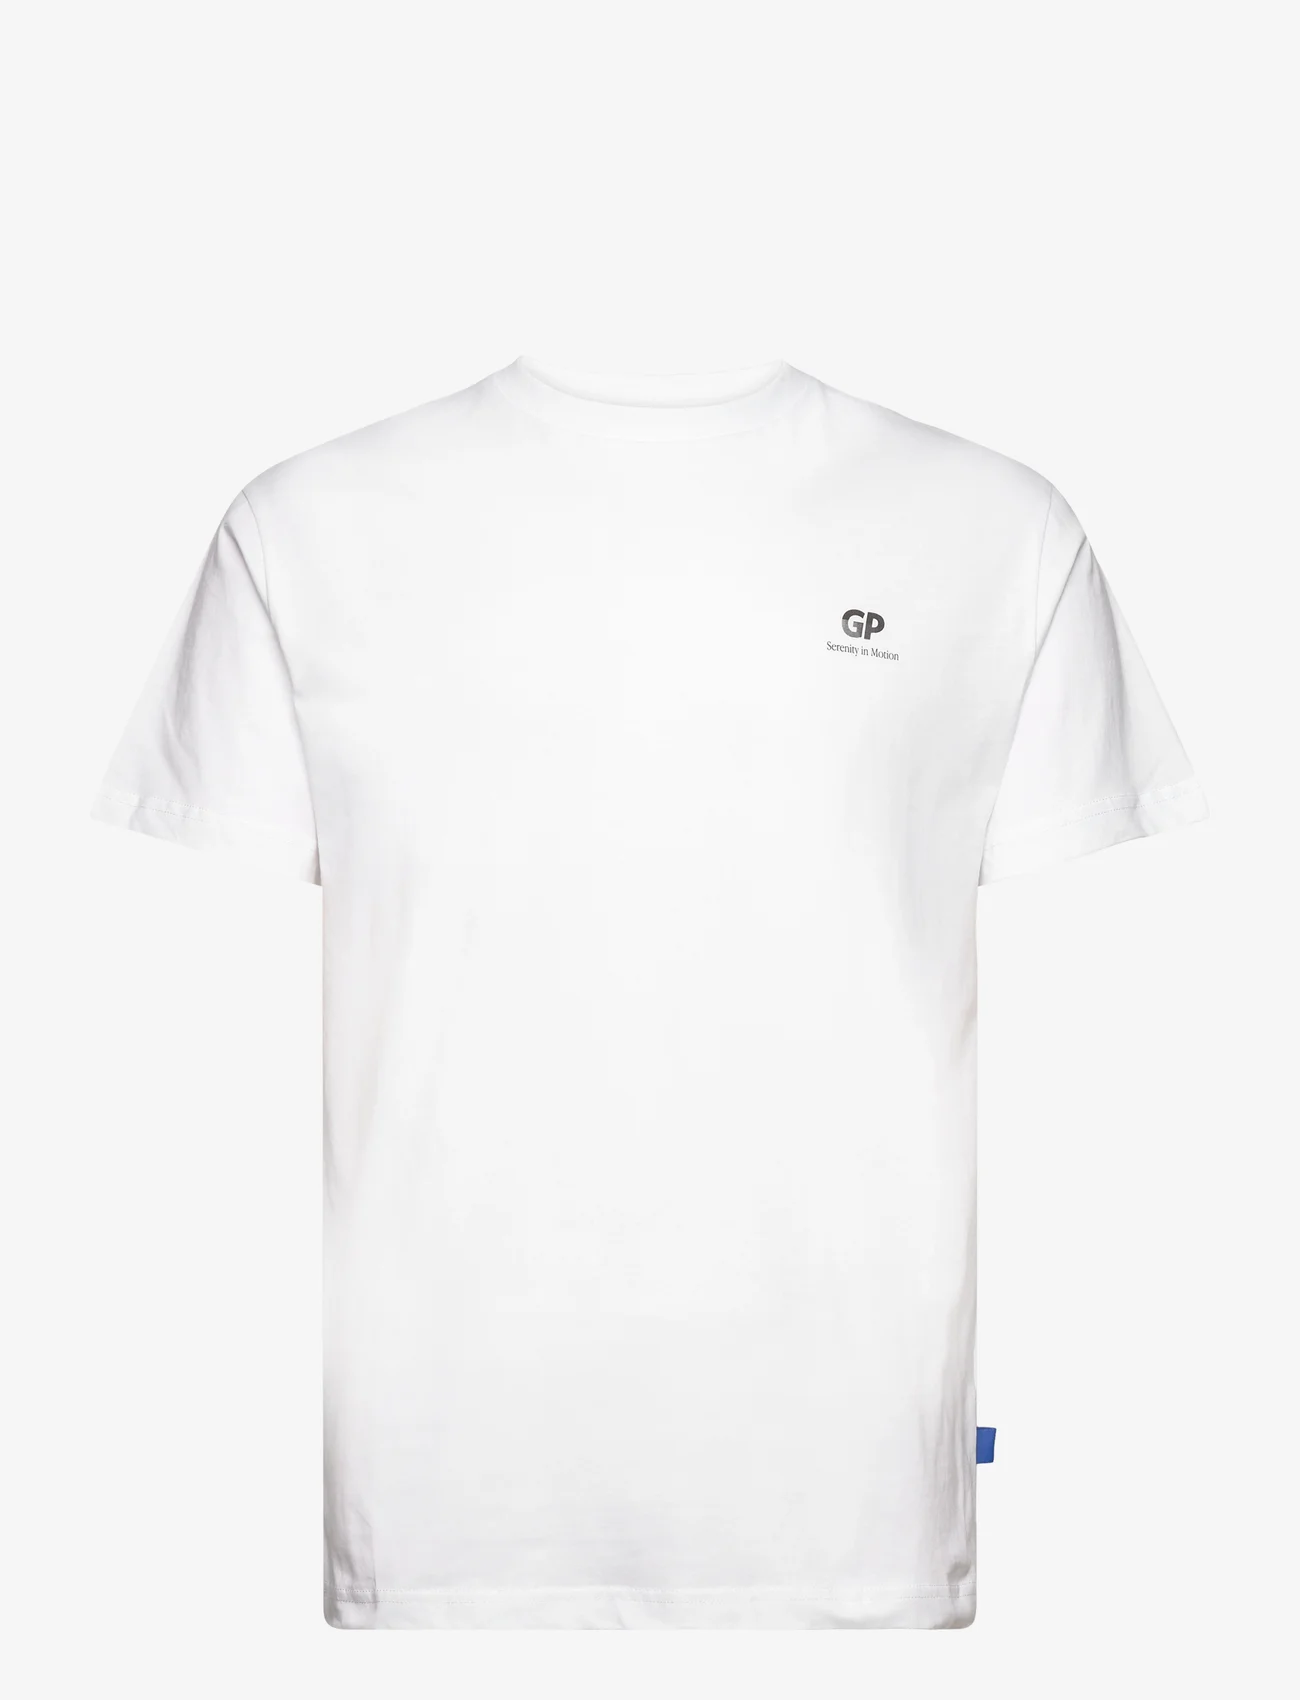 Garment Project - Relaxed Fit Tee - White / Serenity in motion - lyhythihaiset - white - 0